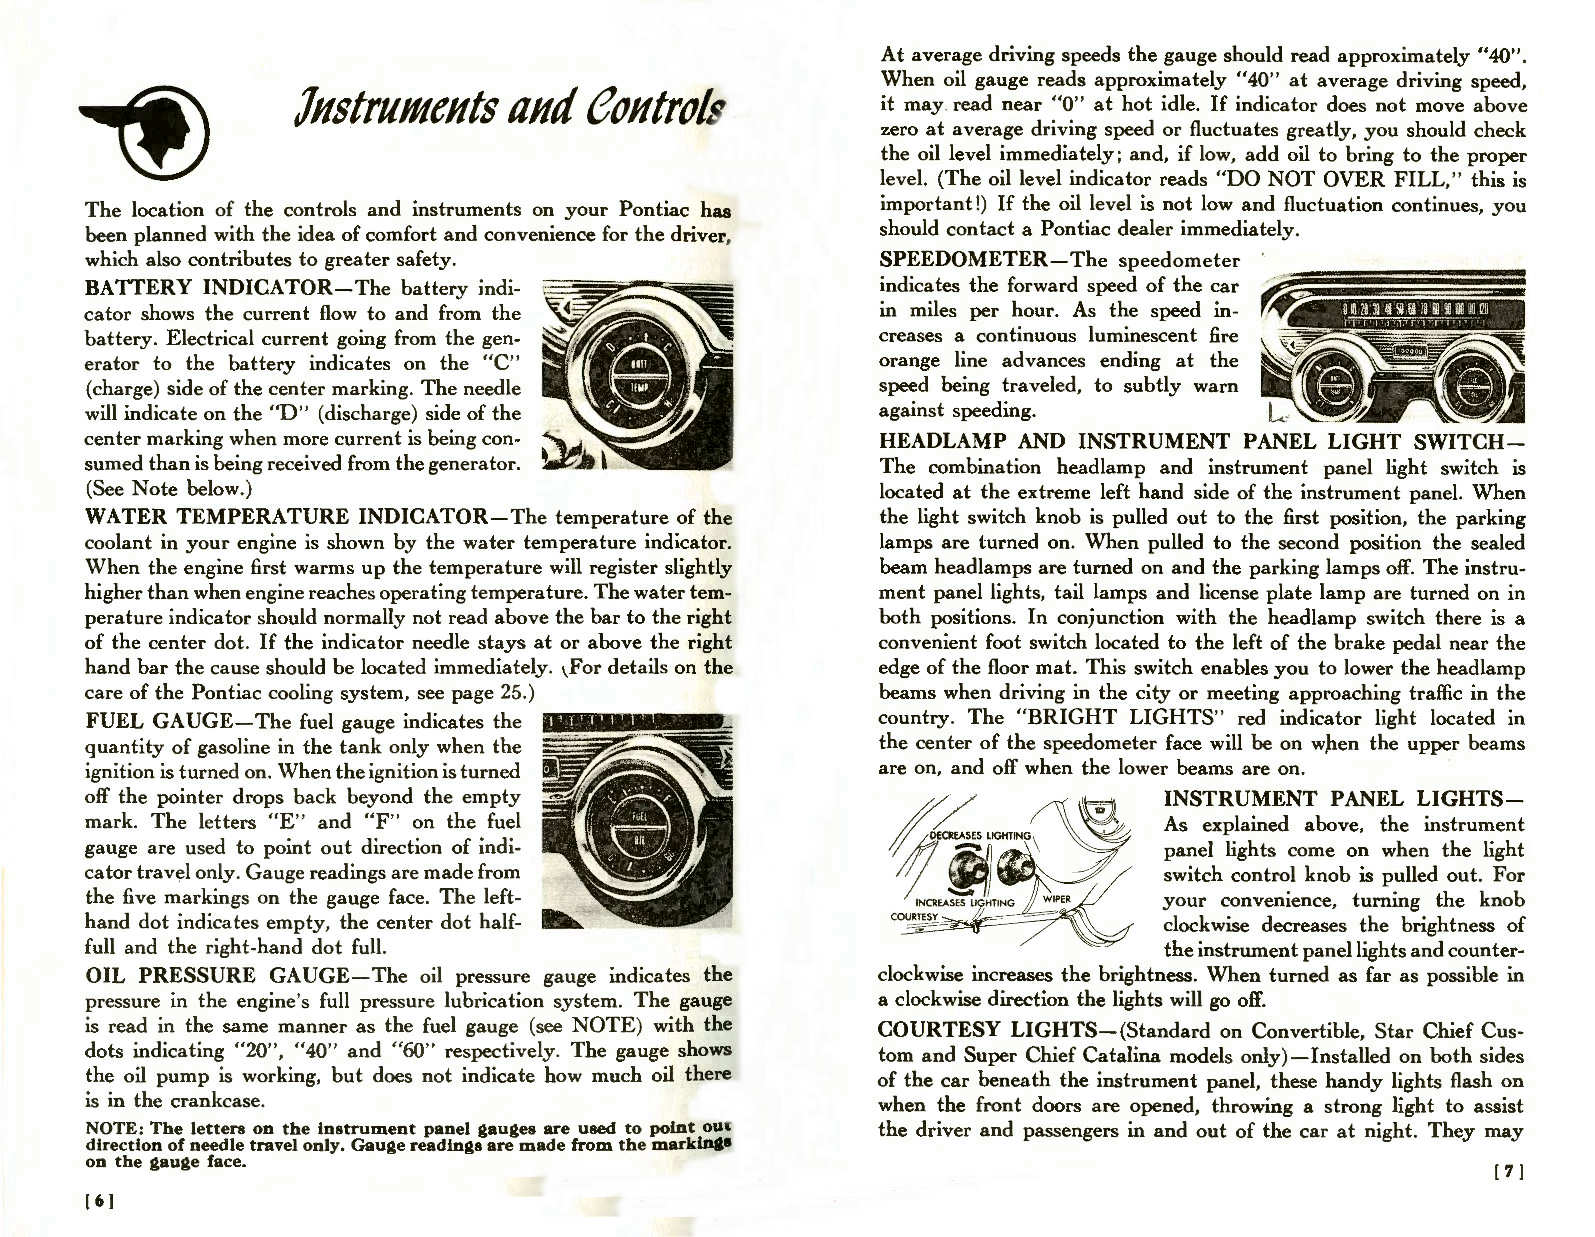 1957_Pontiac_Owners_Guide-06-07